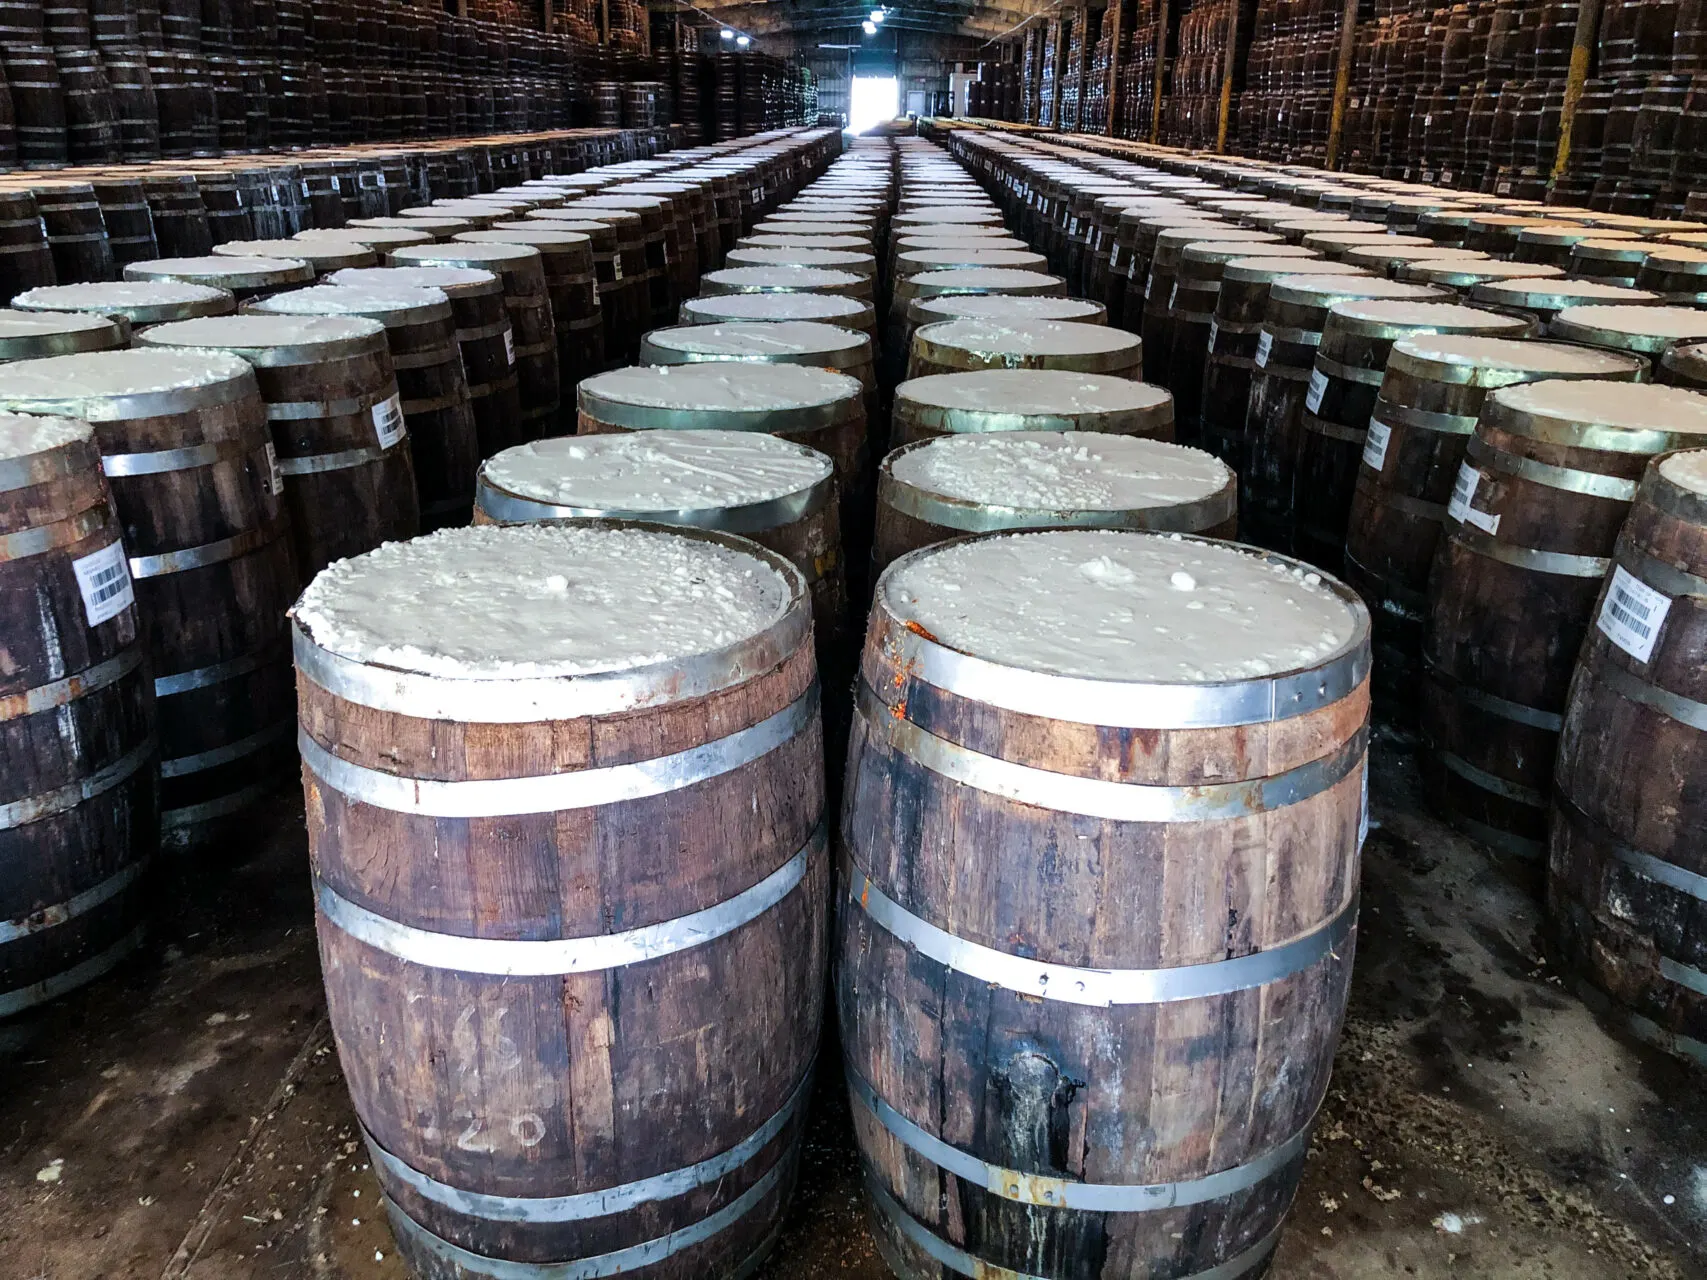 Long rows of barrels filled with pepper mash and capped with salt are fermenting in the Tabasco warehouse.